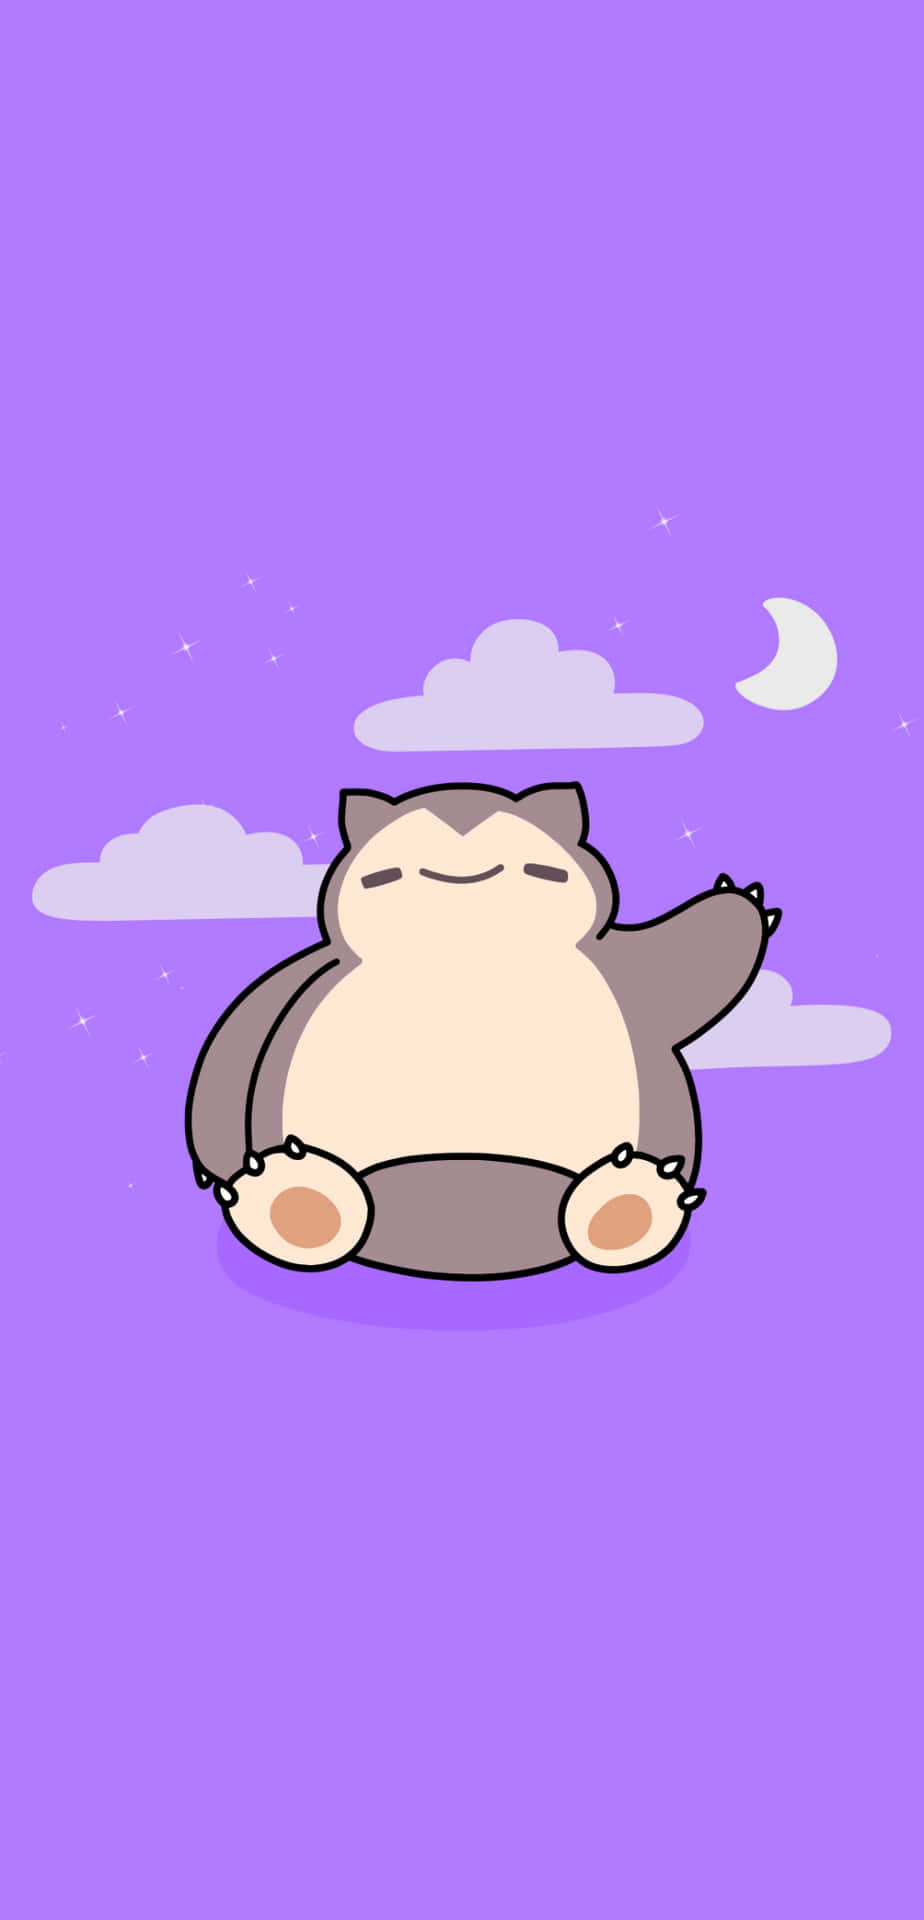 Snorlax iPhone wallpaper. Get this free cute wallpaper for your phone. - Pokemon